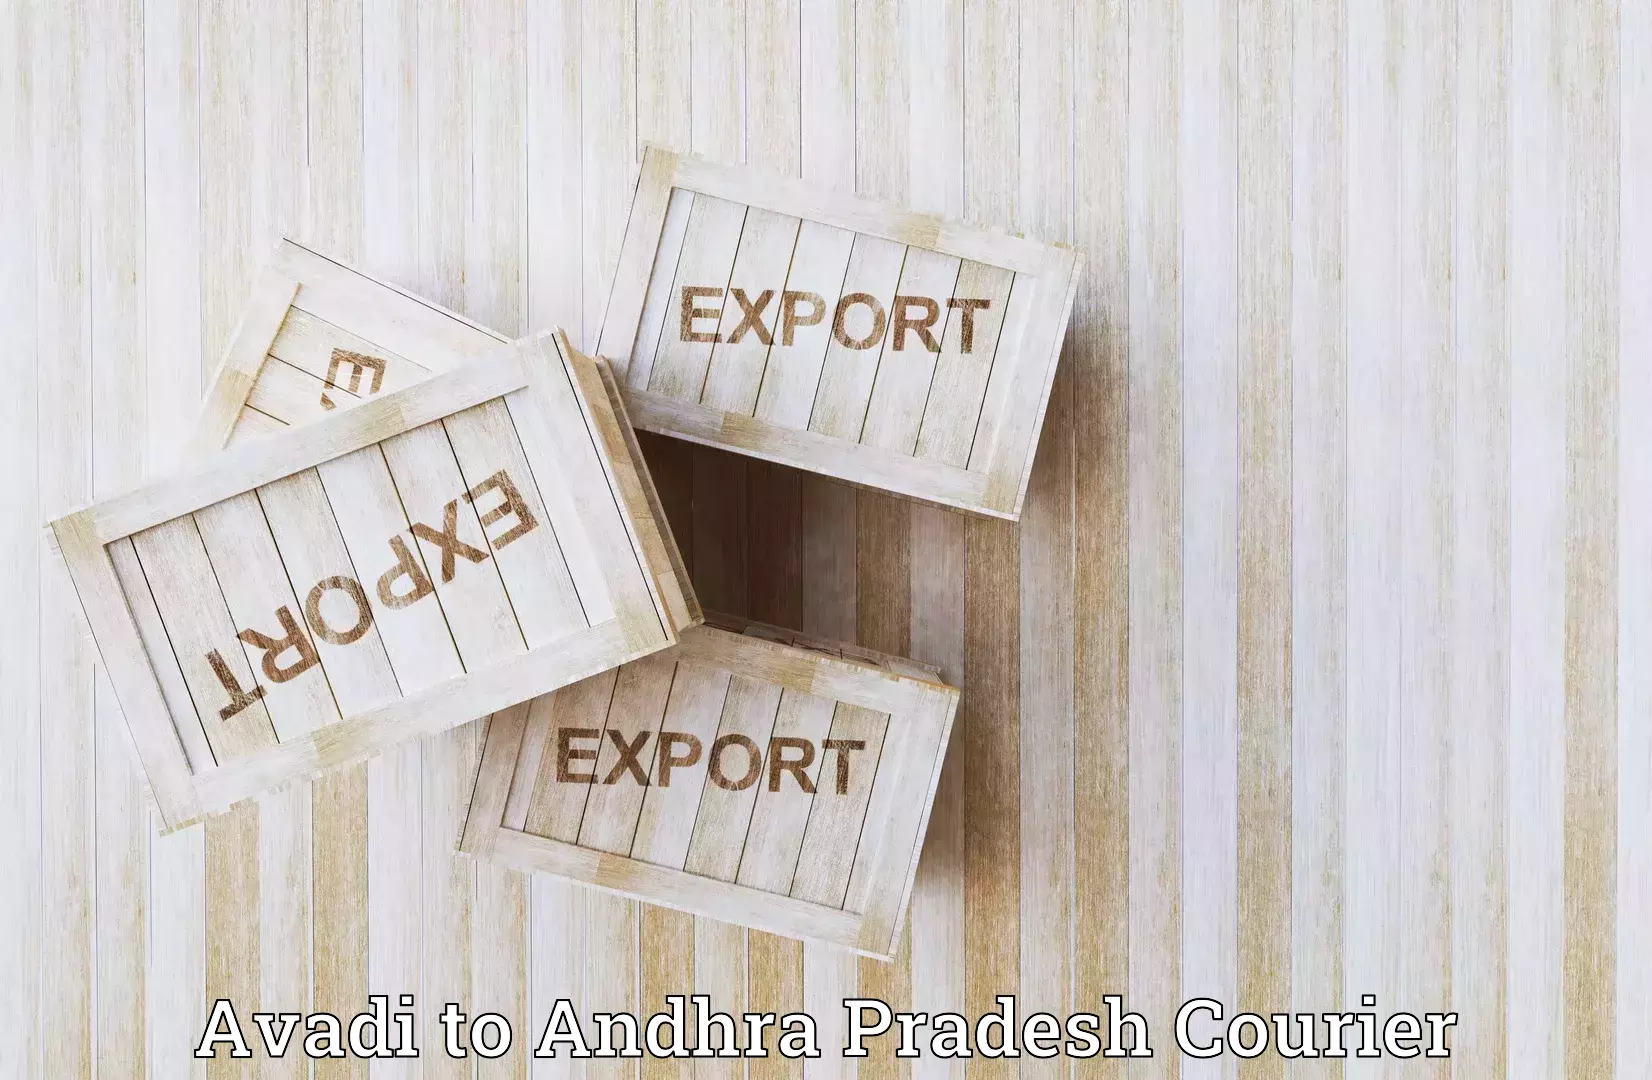 Express courier capabilities in Avadi to Nandigama